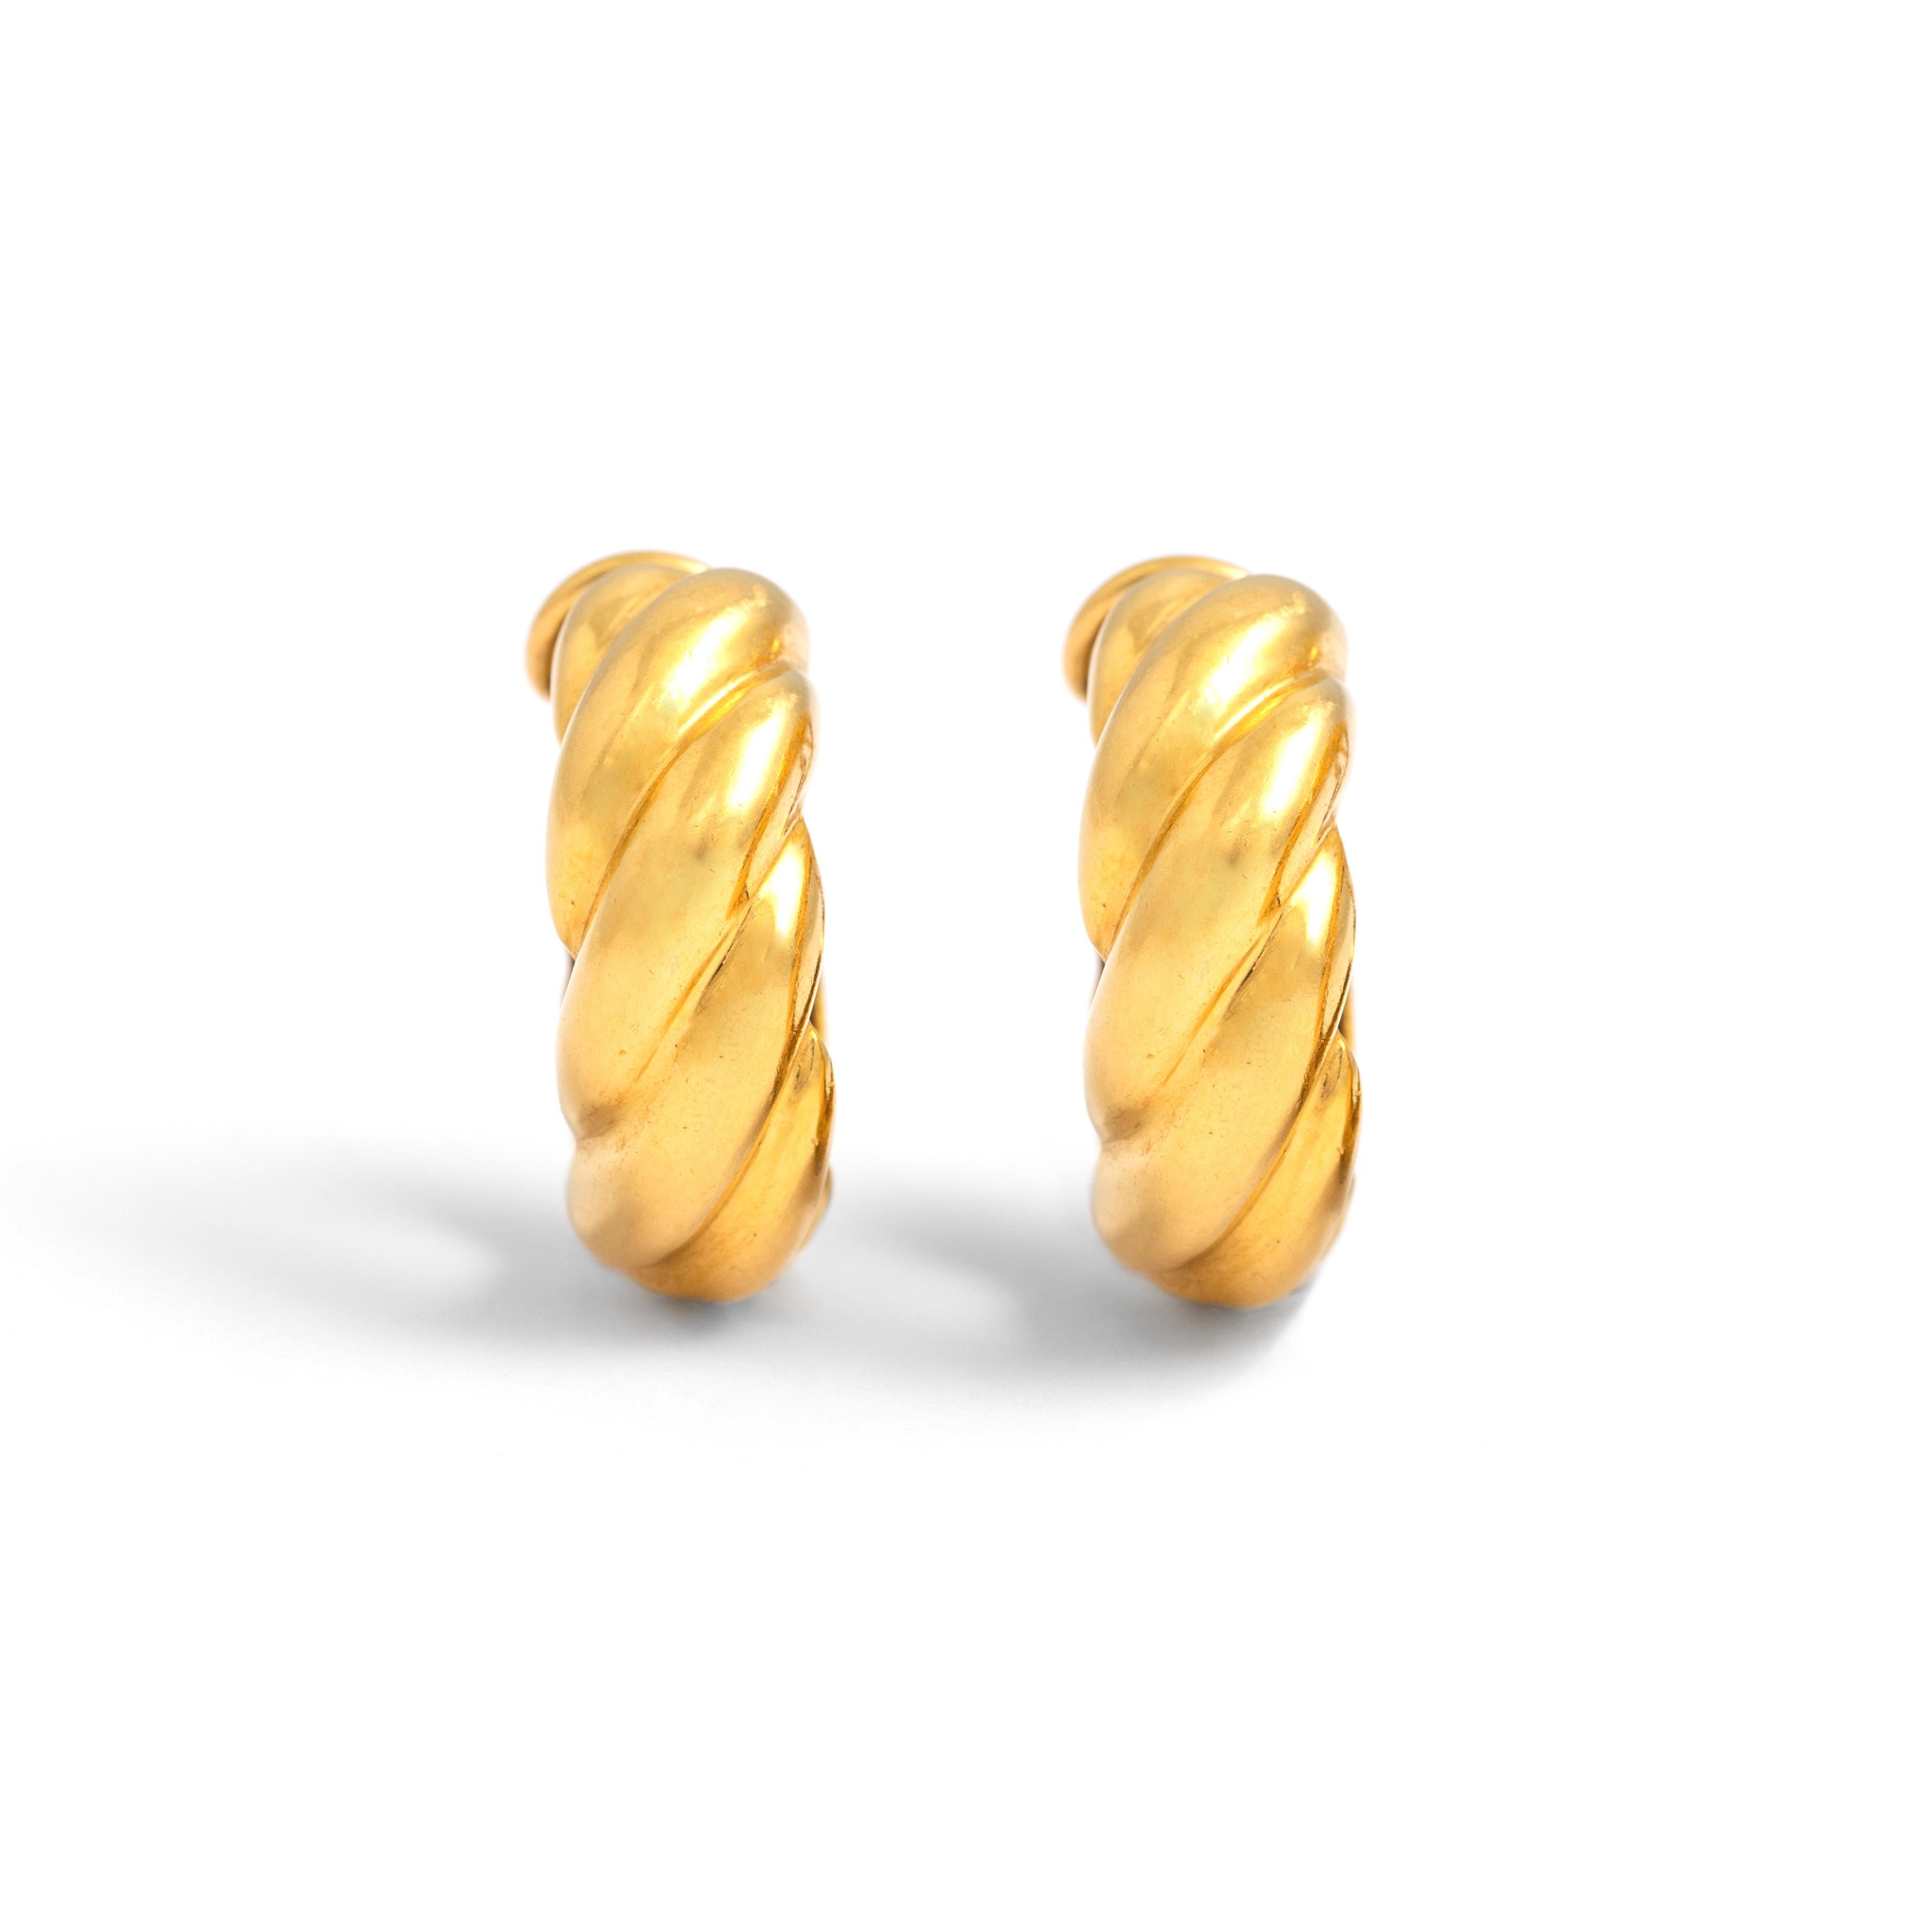 Yellow Gold 18K Earrings.

Depth: 2.50 centimeters.
Height: 2.60 centimeters.
Total weight: 15.56 grams